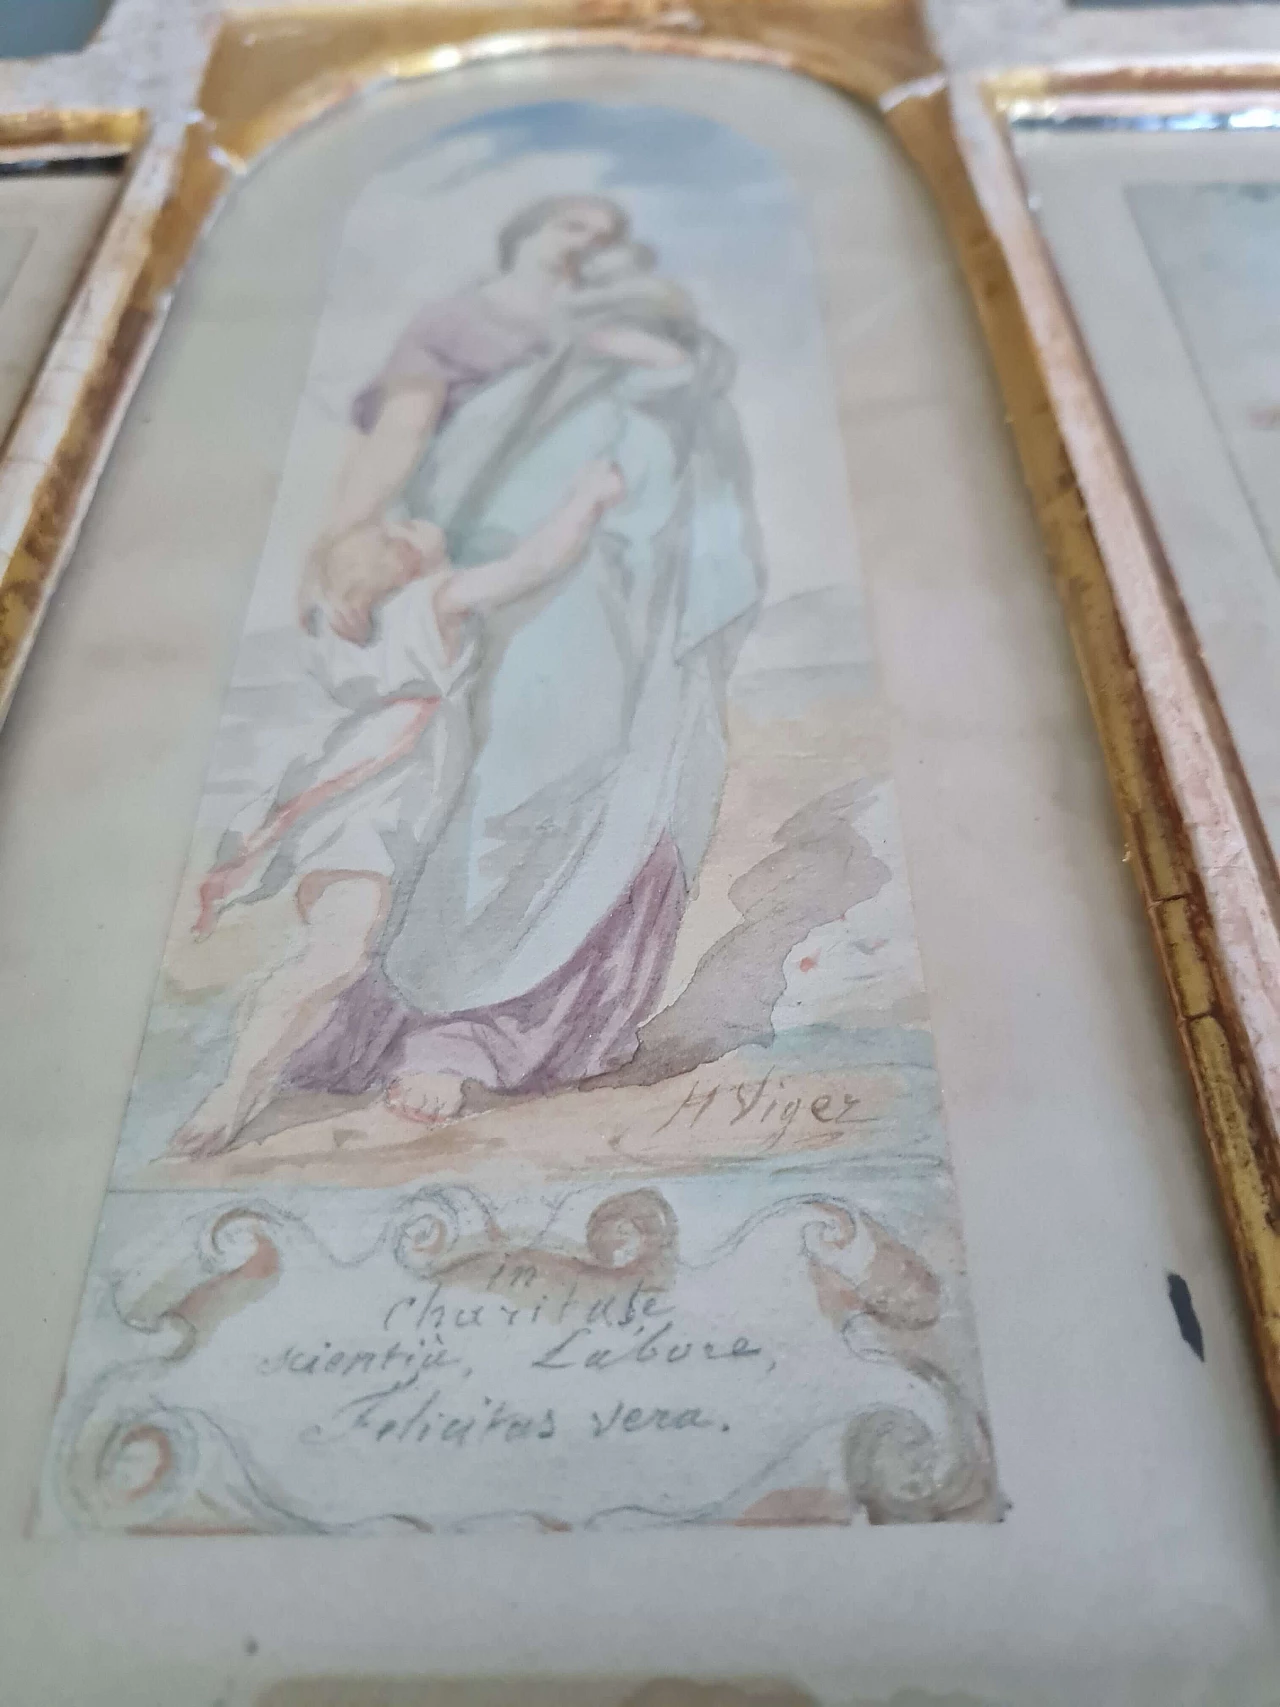 Triptych of watercolours by Viger on laid paper, 19th century 9